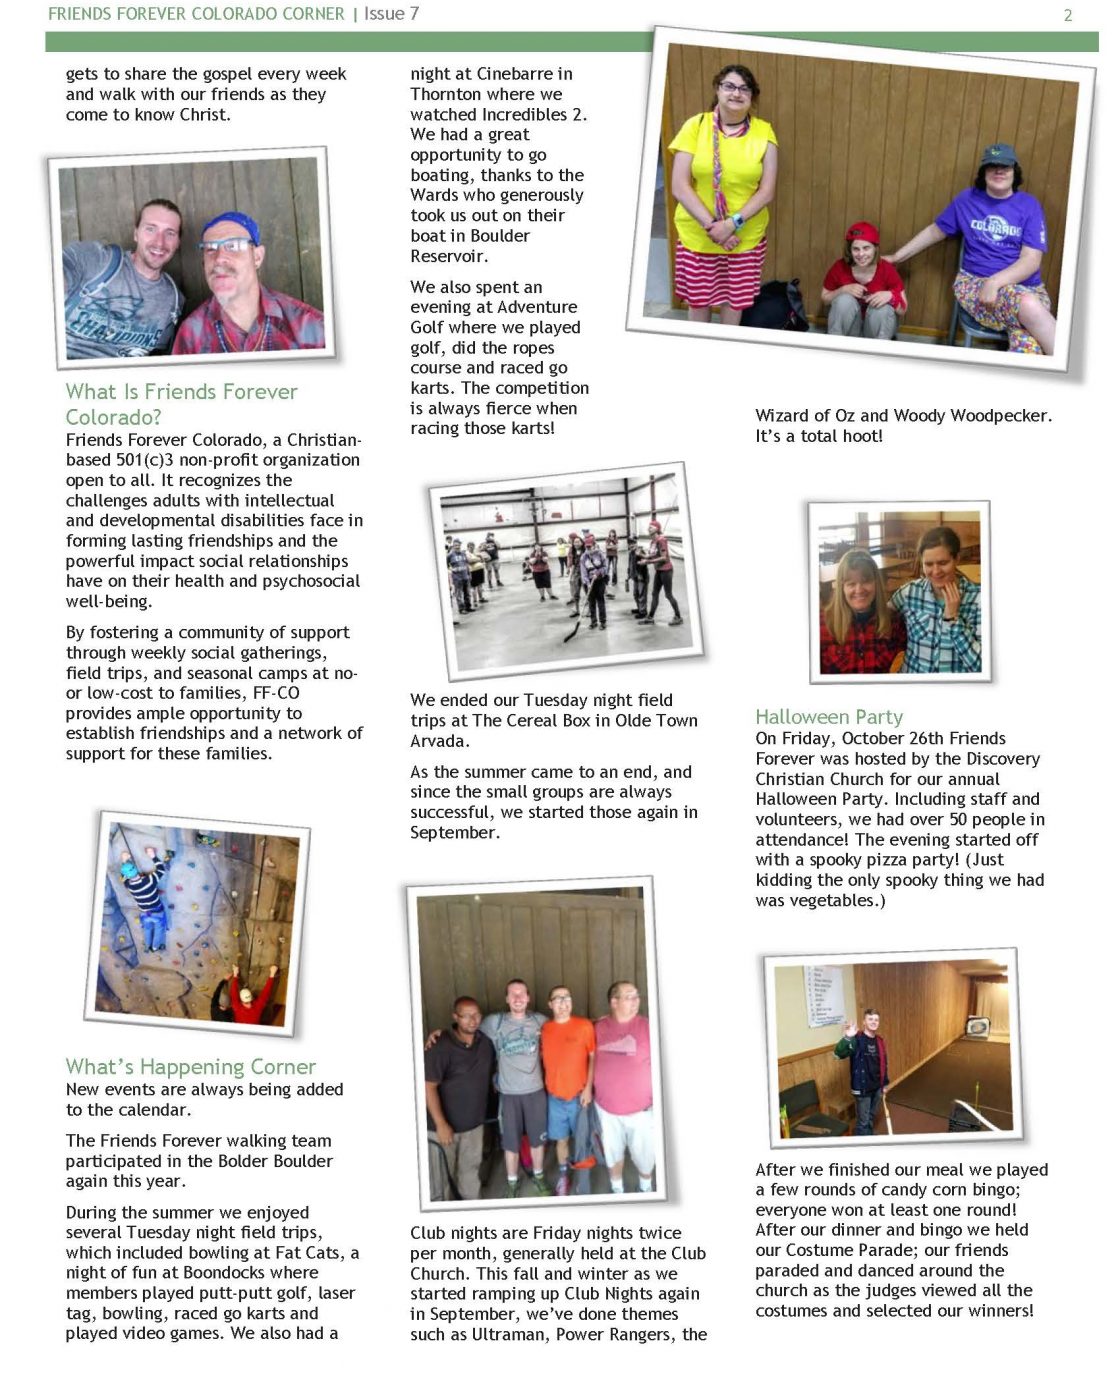 Newsletter Issue 7 - page 2